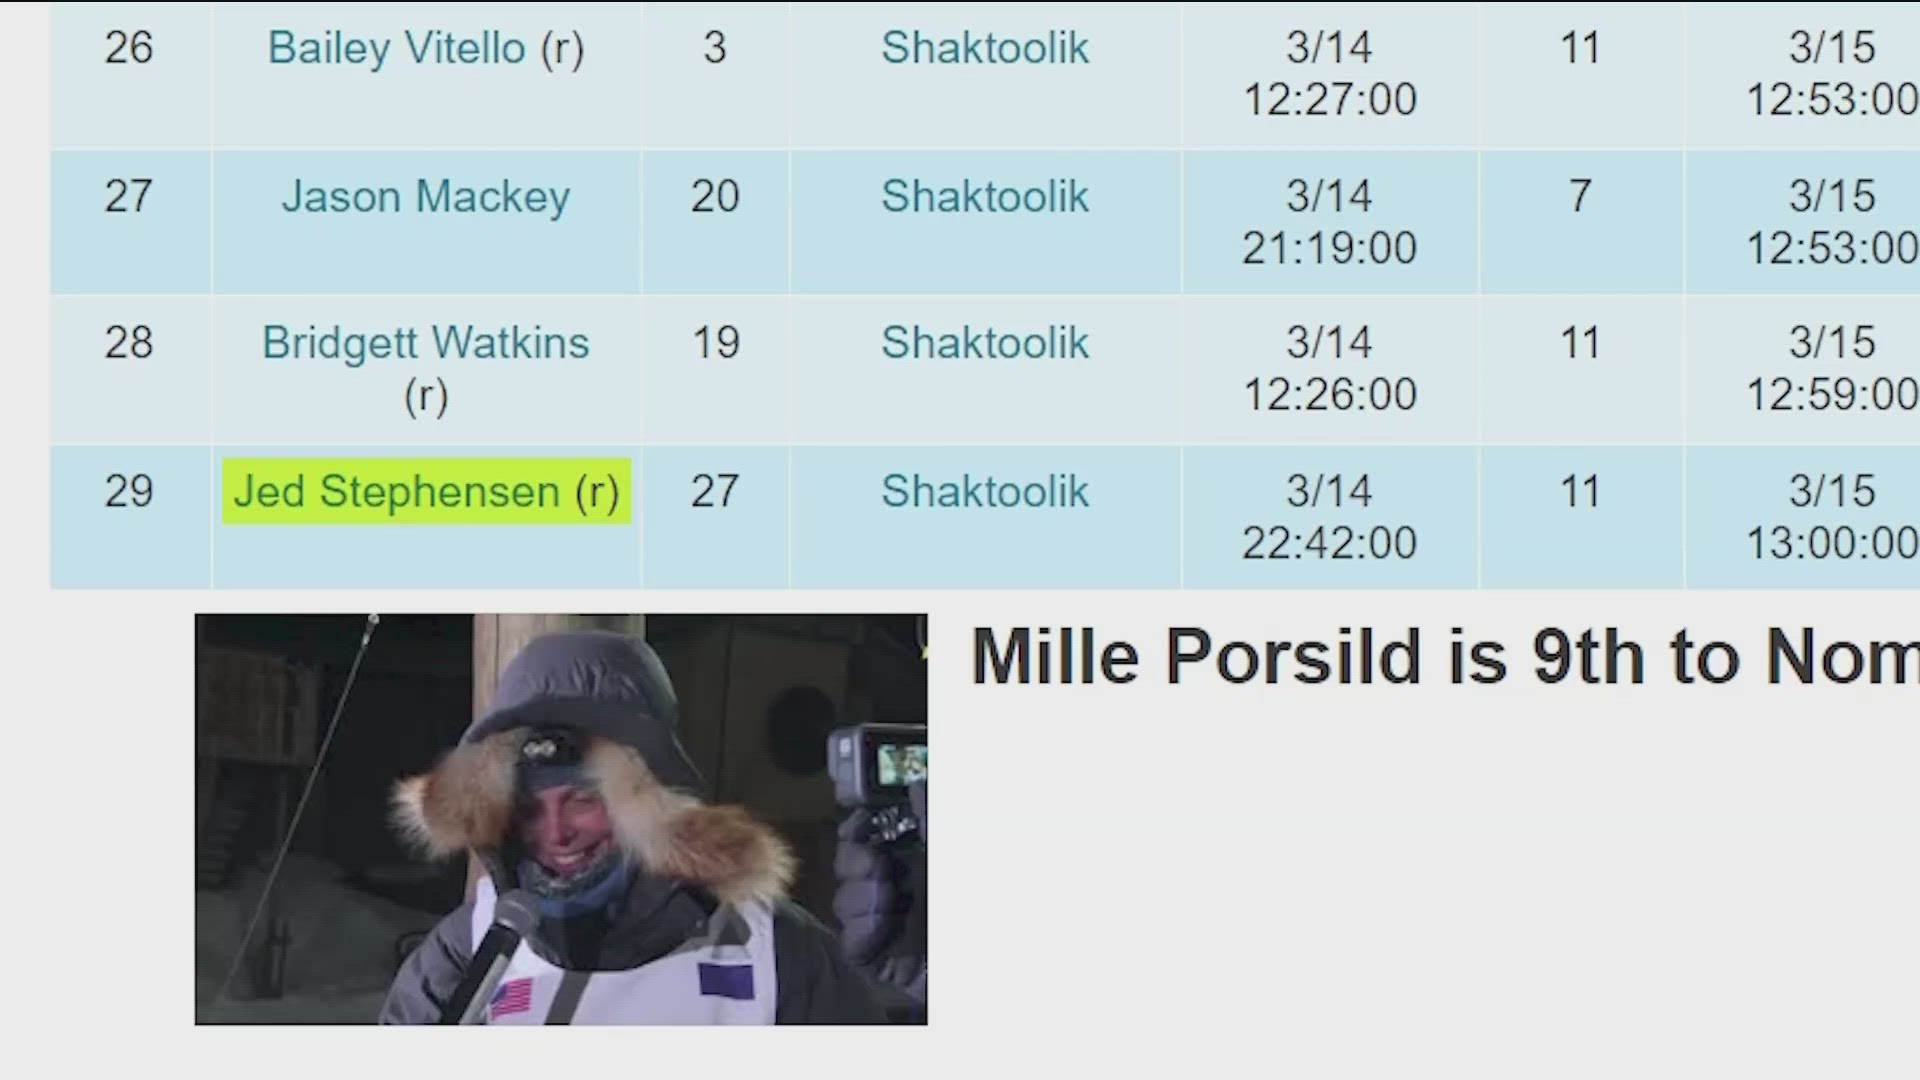 Idaho's very own, Jed Stephenson, just finished his first Iditarod sled race in 29th place. And although that's technically last place, Jed is still #1 to us.